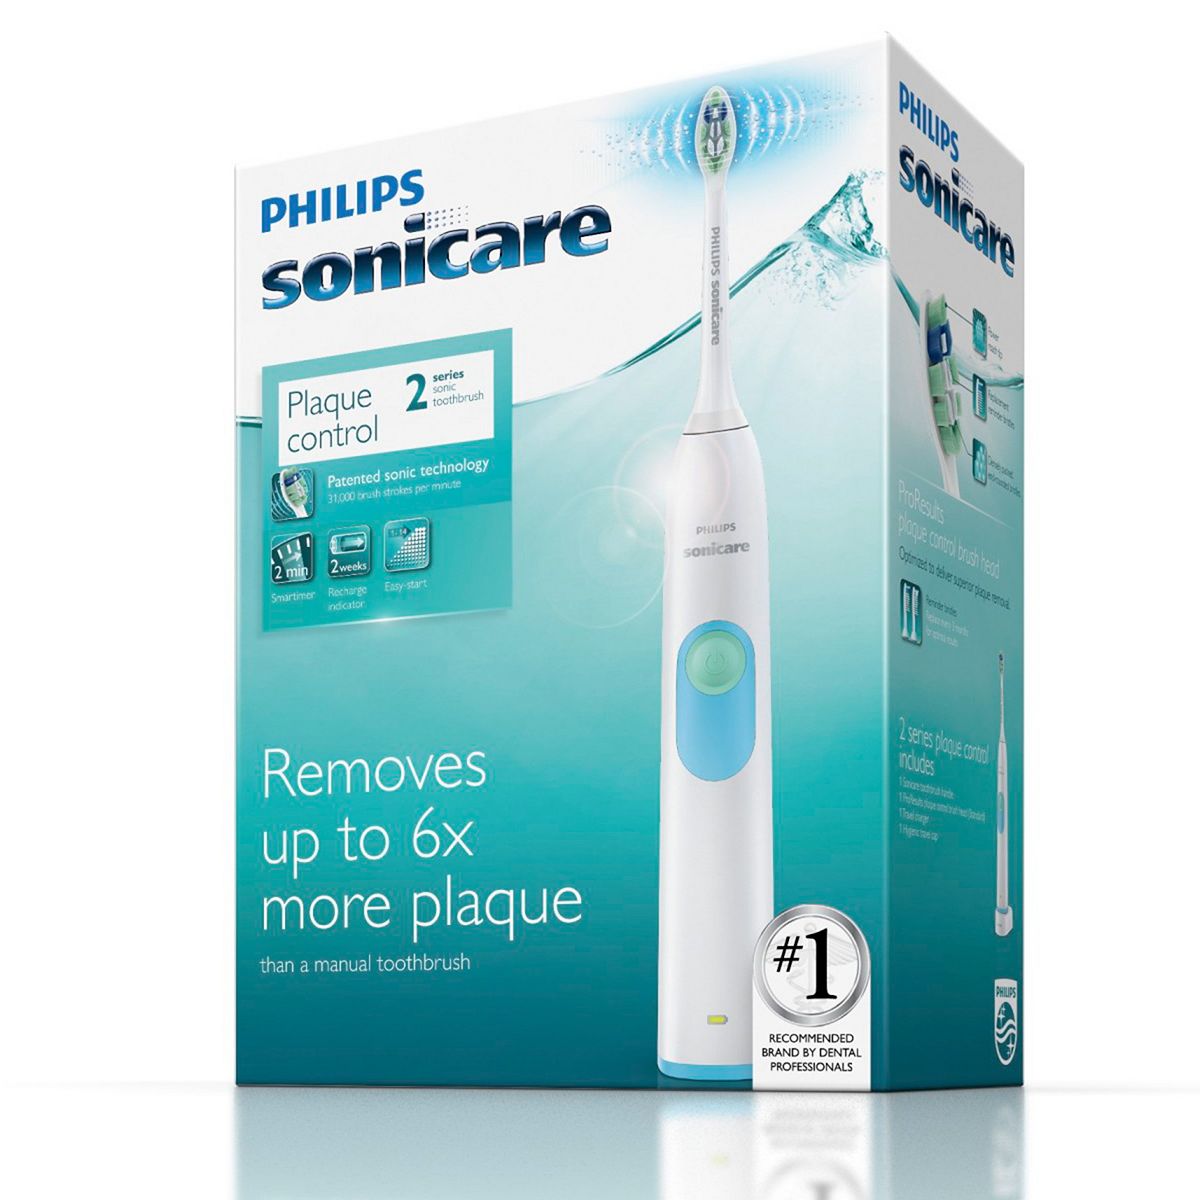 Philips Sonicare Series 2 Plaque Control Rechargeable Toothbrush $29.99